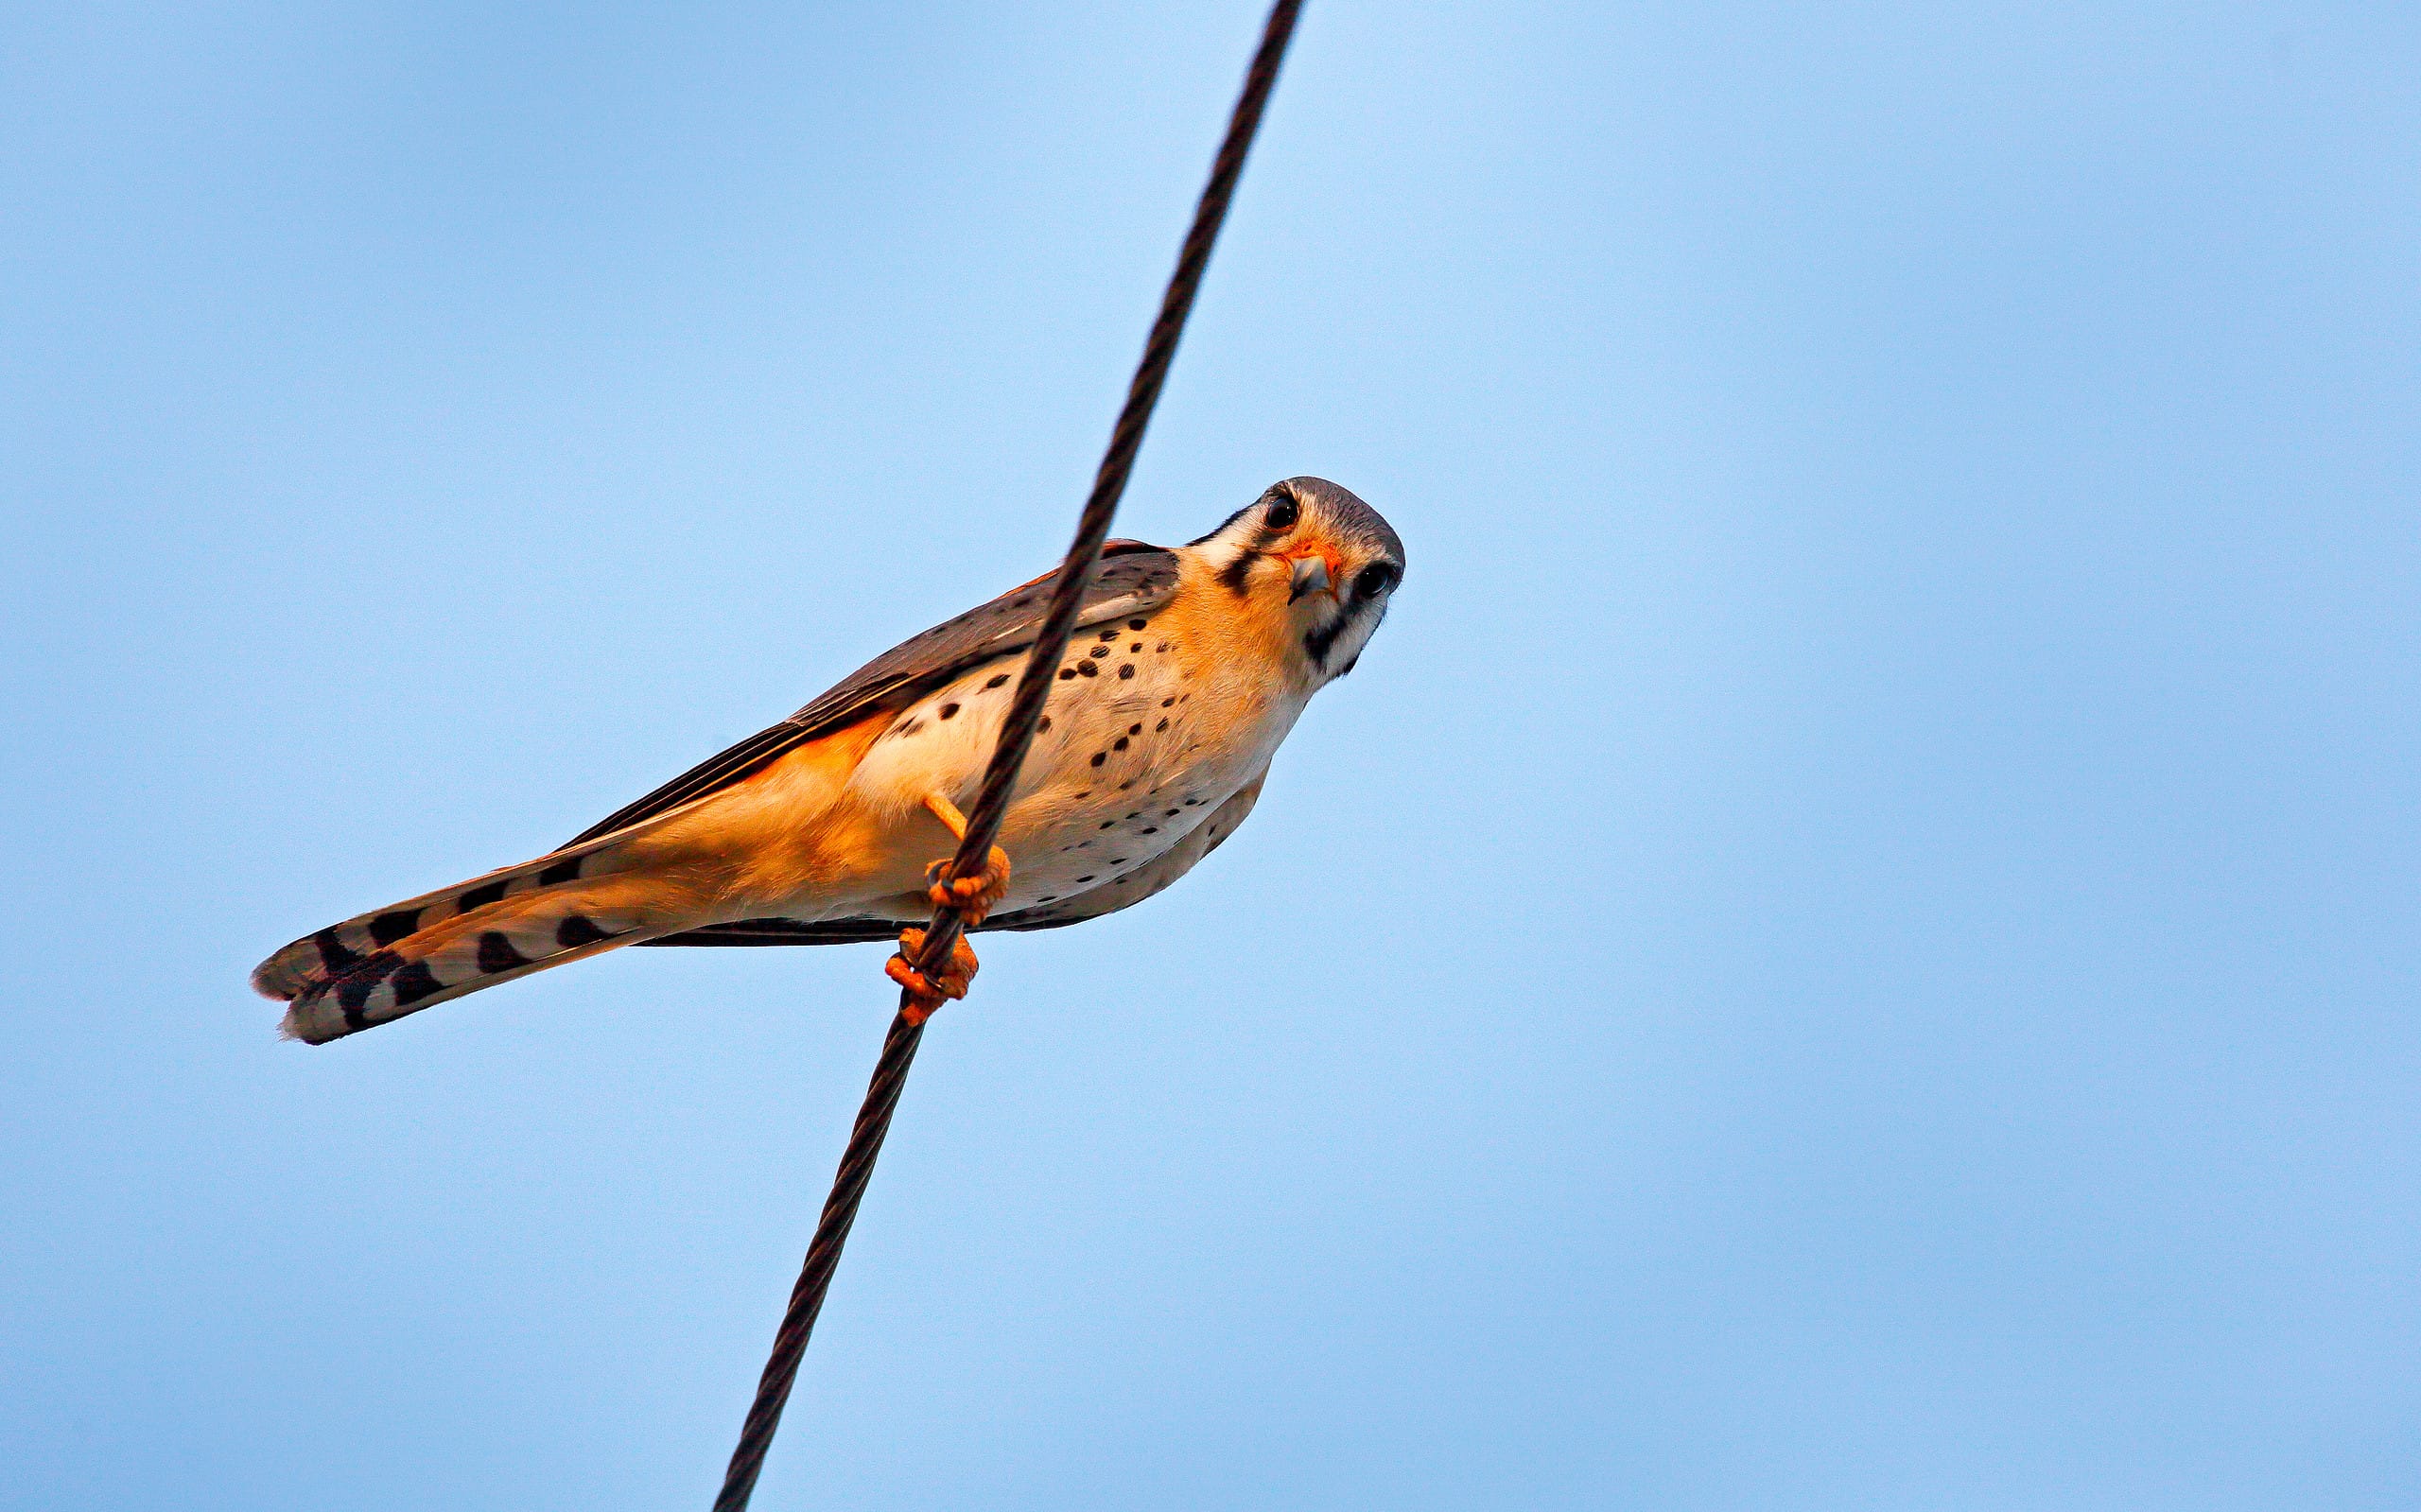 American kestrel Falco sparverius, sitting on the power lines, little bird of prey from Brazil. Bird in the nature habitat. Wildlife scene from nature.